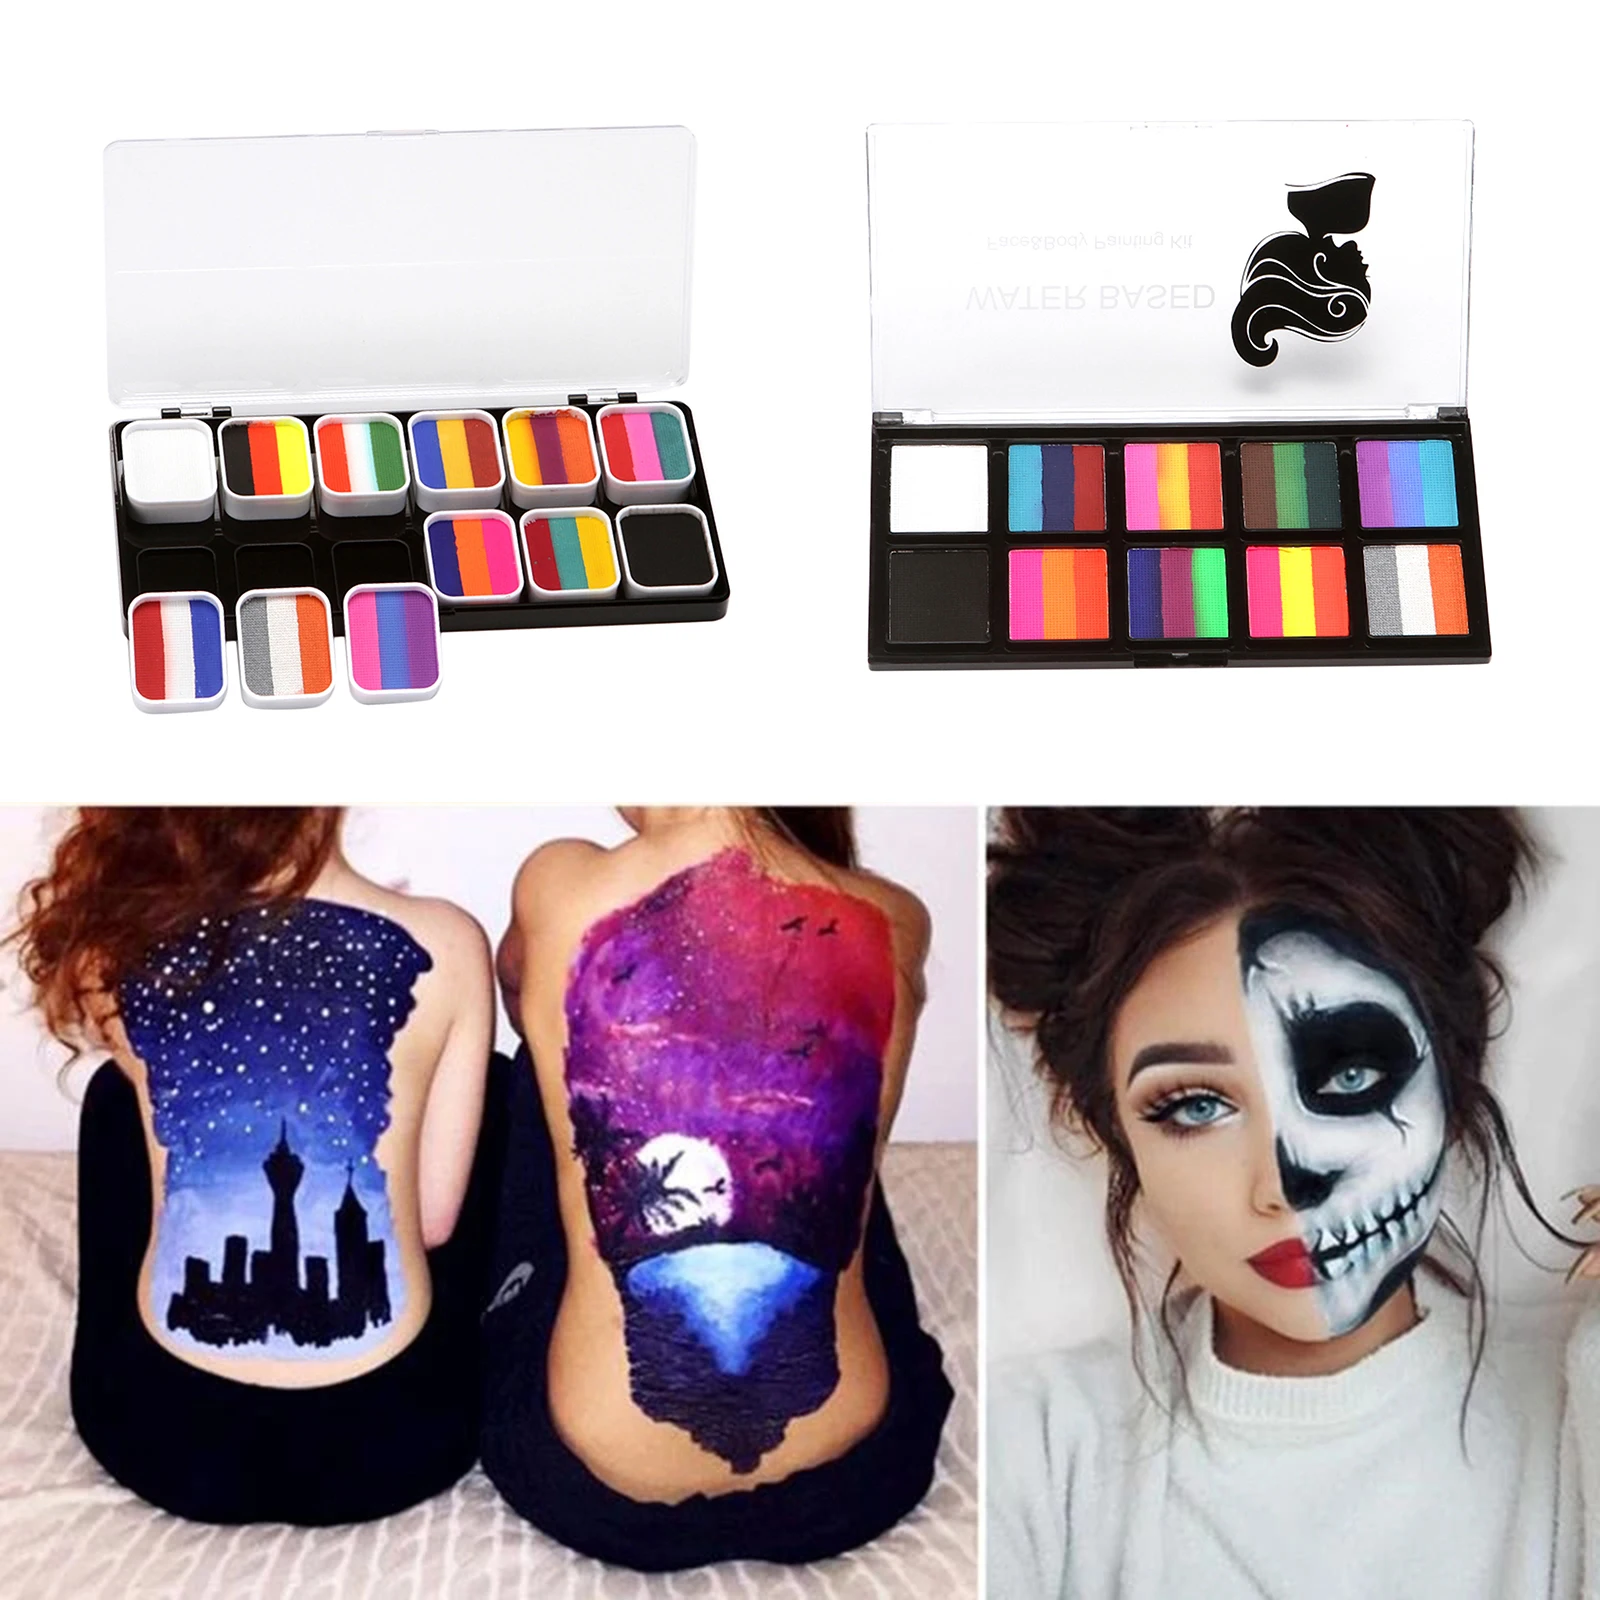 Paint Face Body Painting Pigment Art Theme Party, Halloween, Fancy Dress Party Painting Toys for Kids Adults